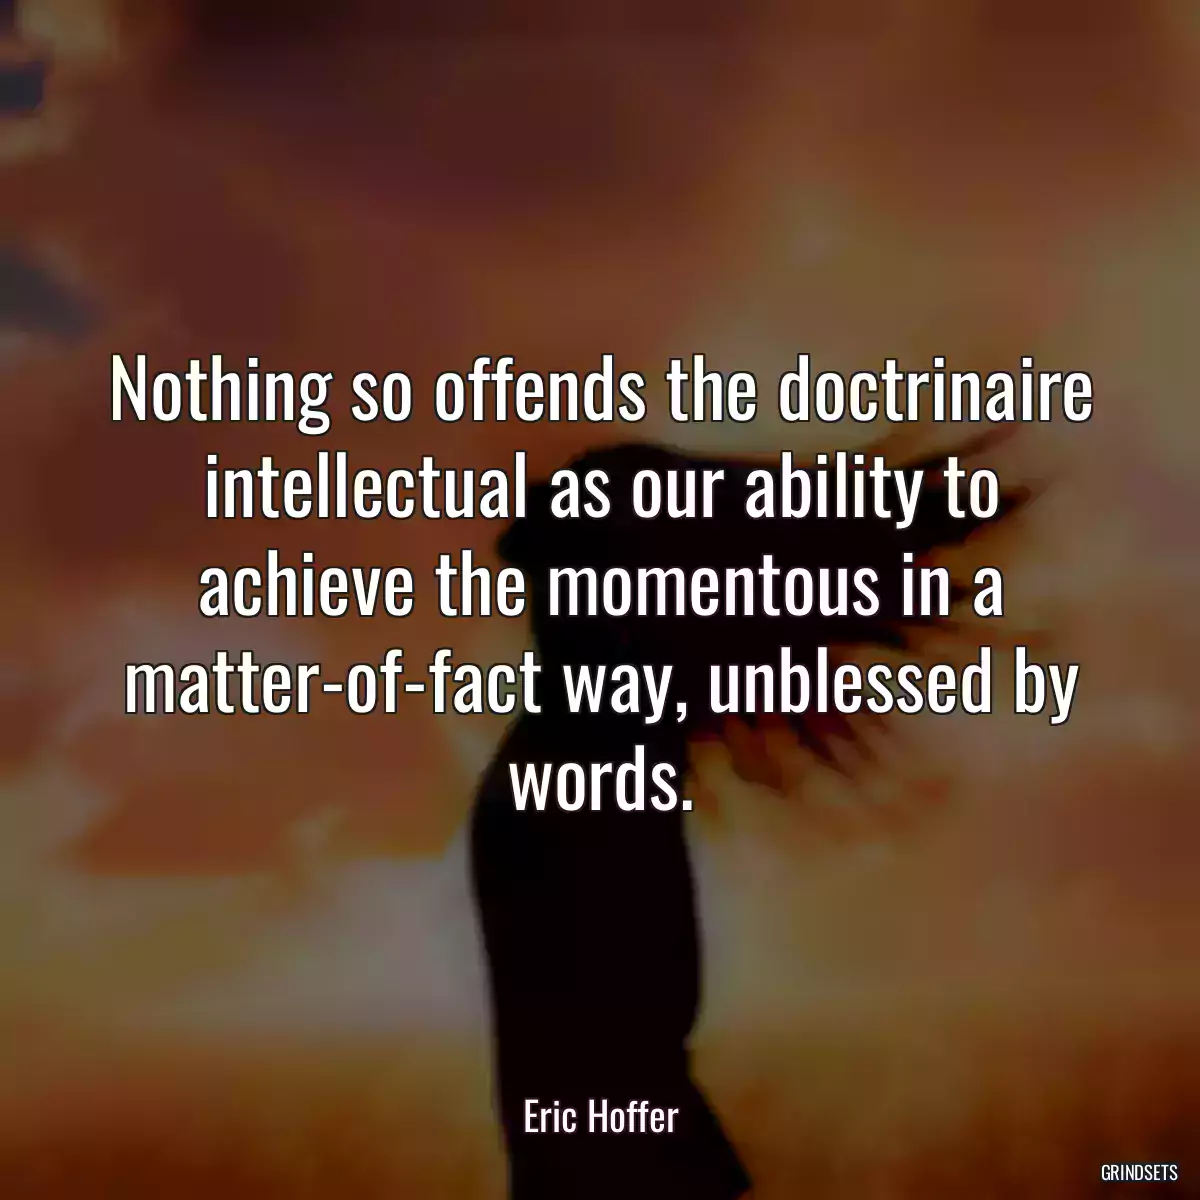 Nothing so offends the doctrinaire intellectual as our ability to achieve the momentous in a matter-of-fact way, unblessed by words.